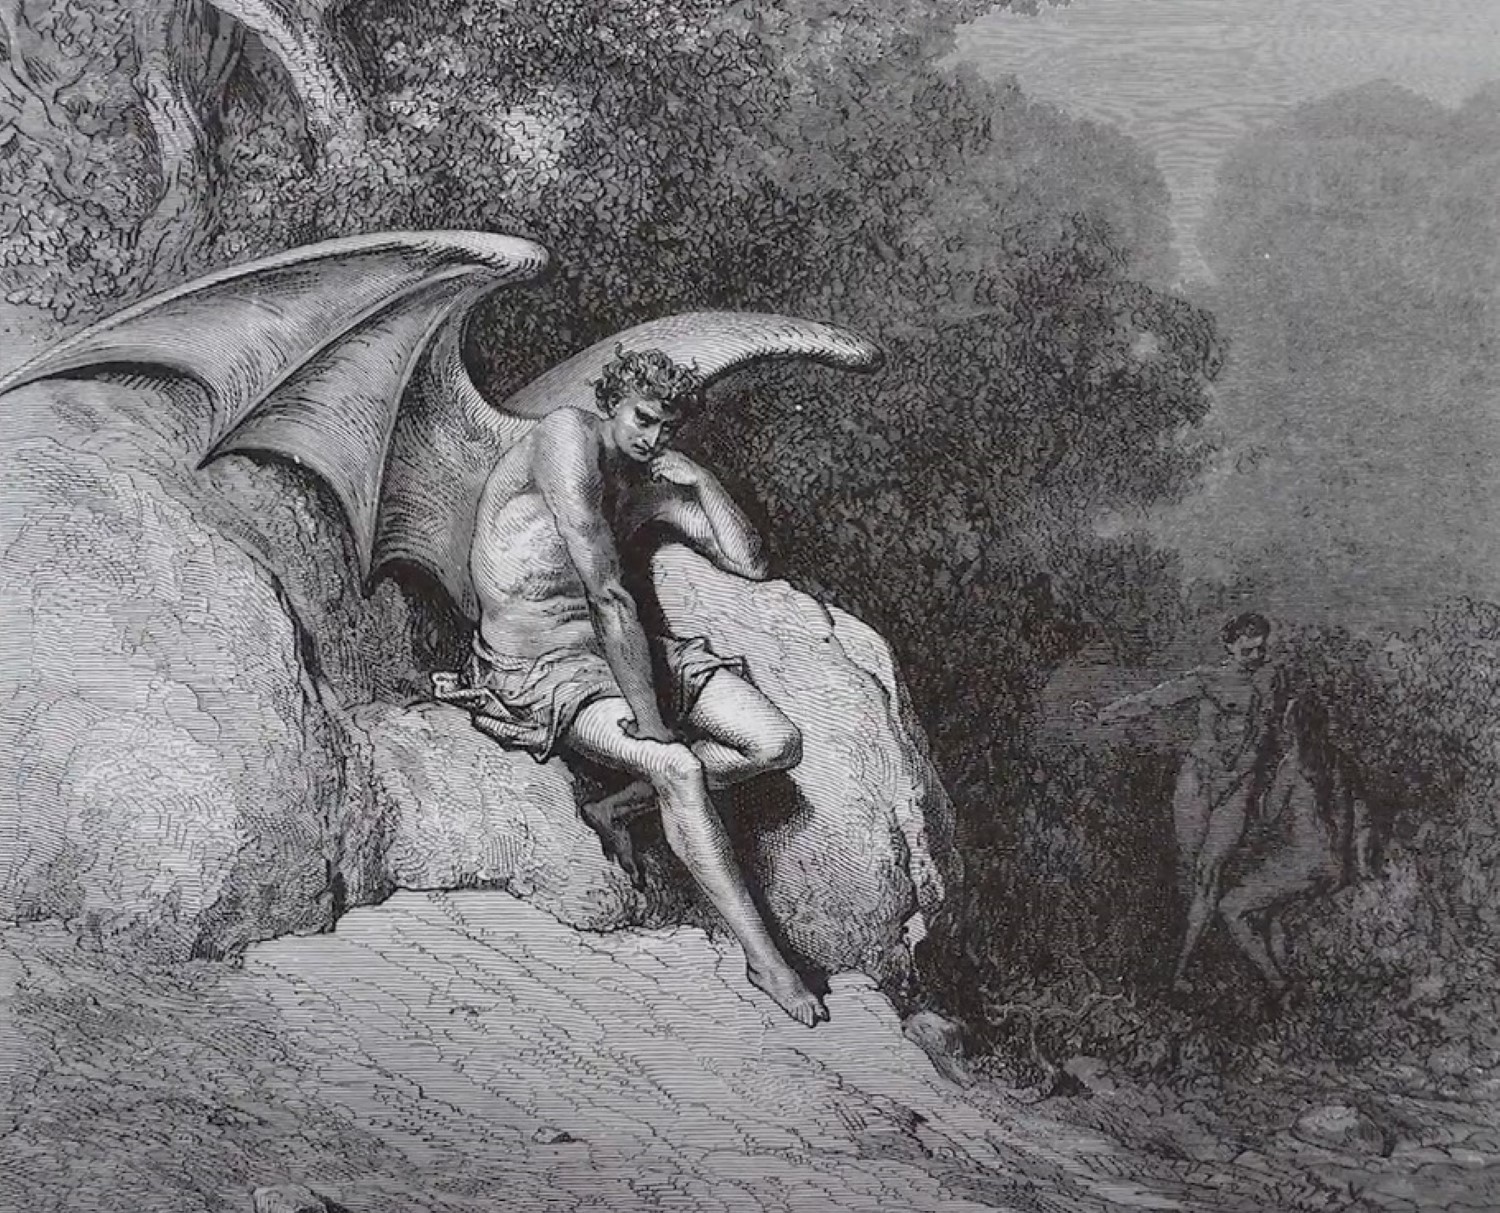 Illustration for John Milton’s “Paradise Lost“ by Gustave Doré